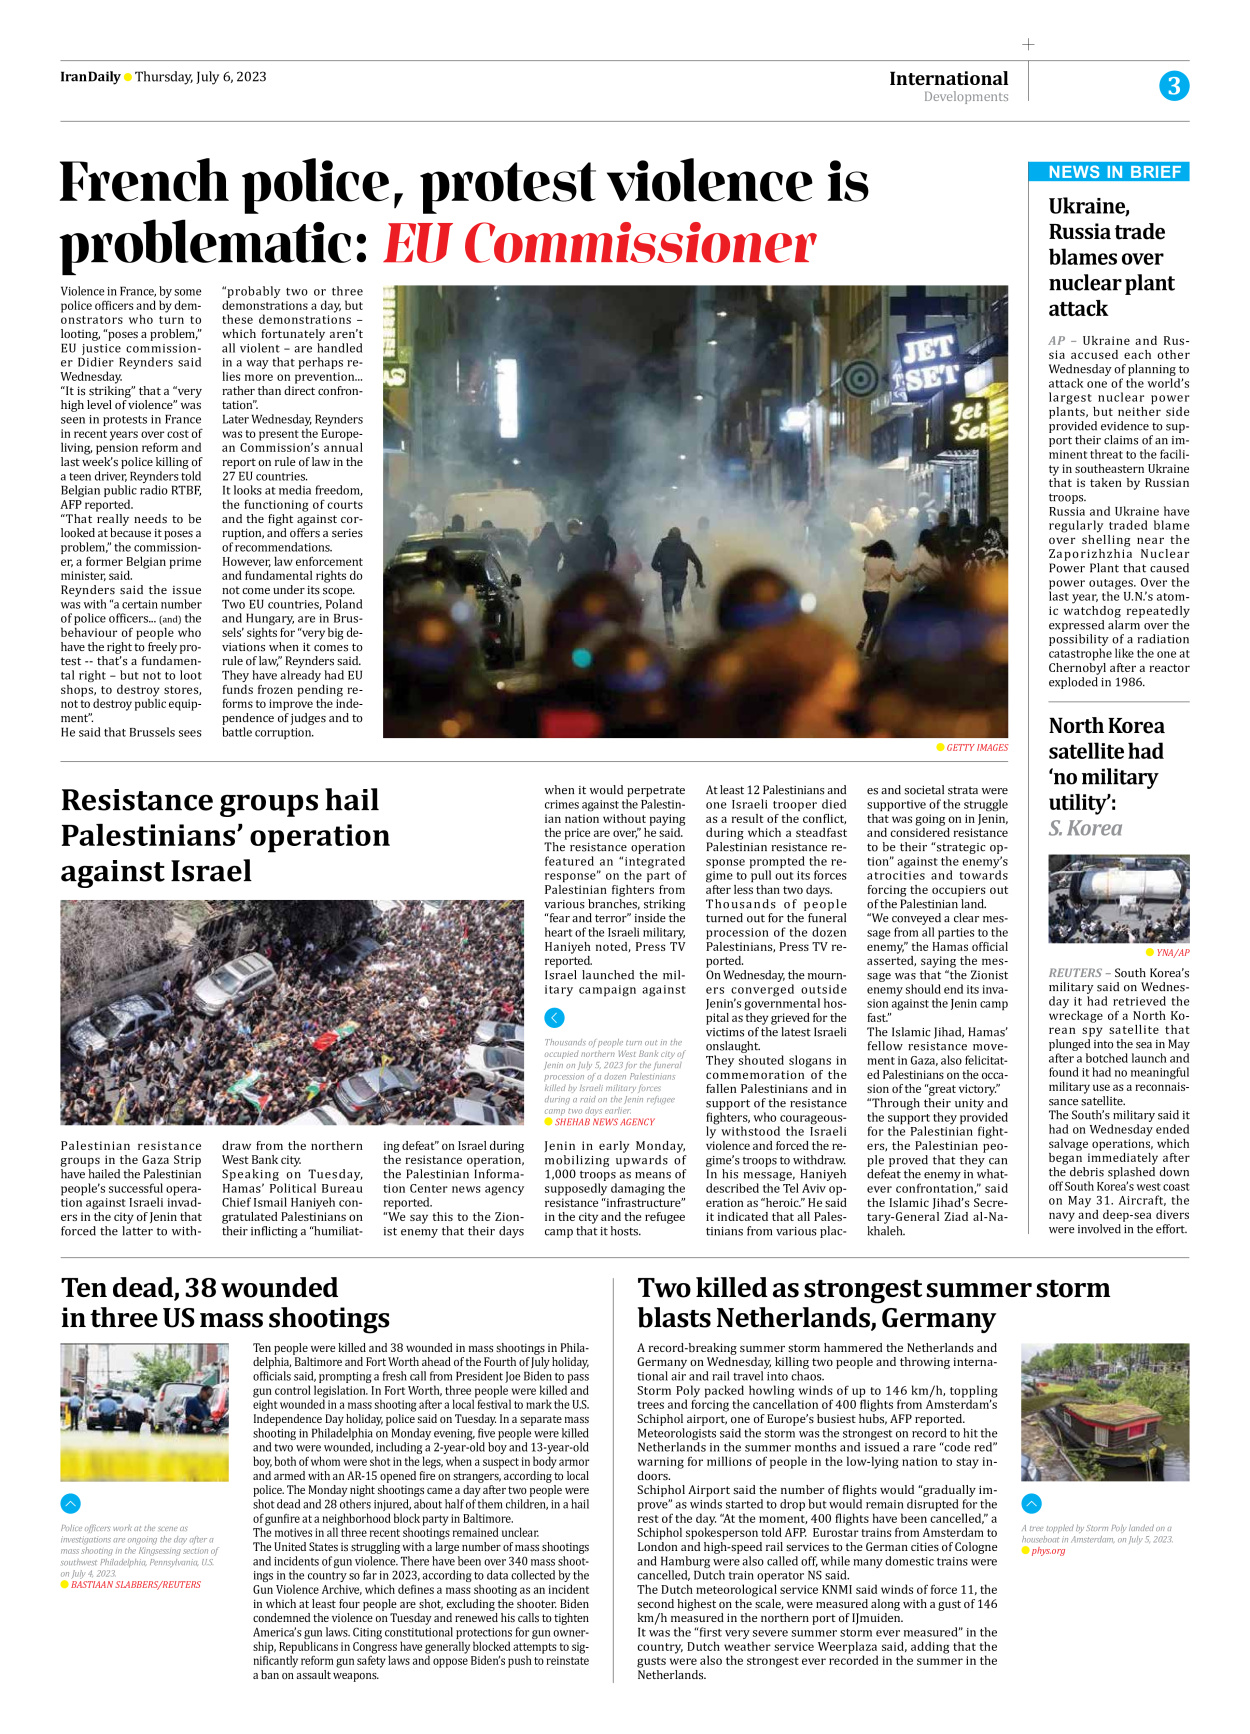 Iran Daily - Number Seven Thousand Three Hundred and Thirty Two - 06 July 2023 - Page 3